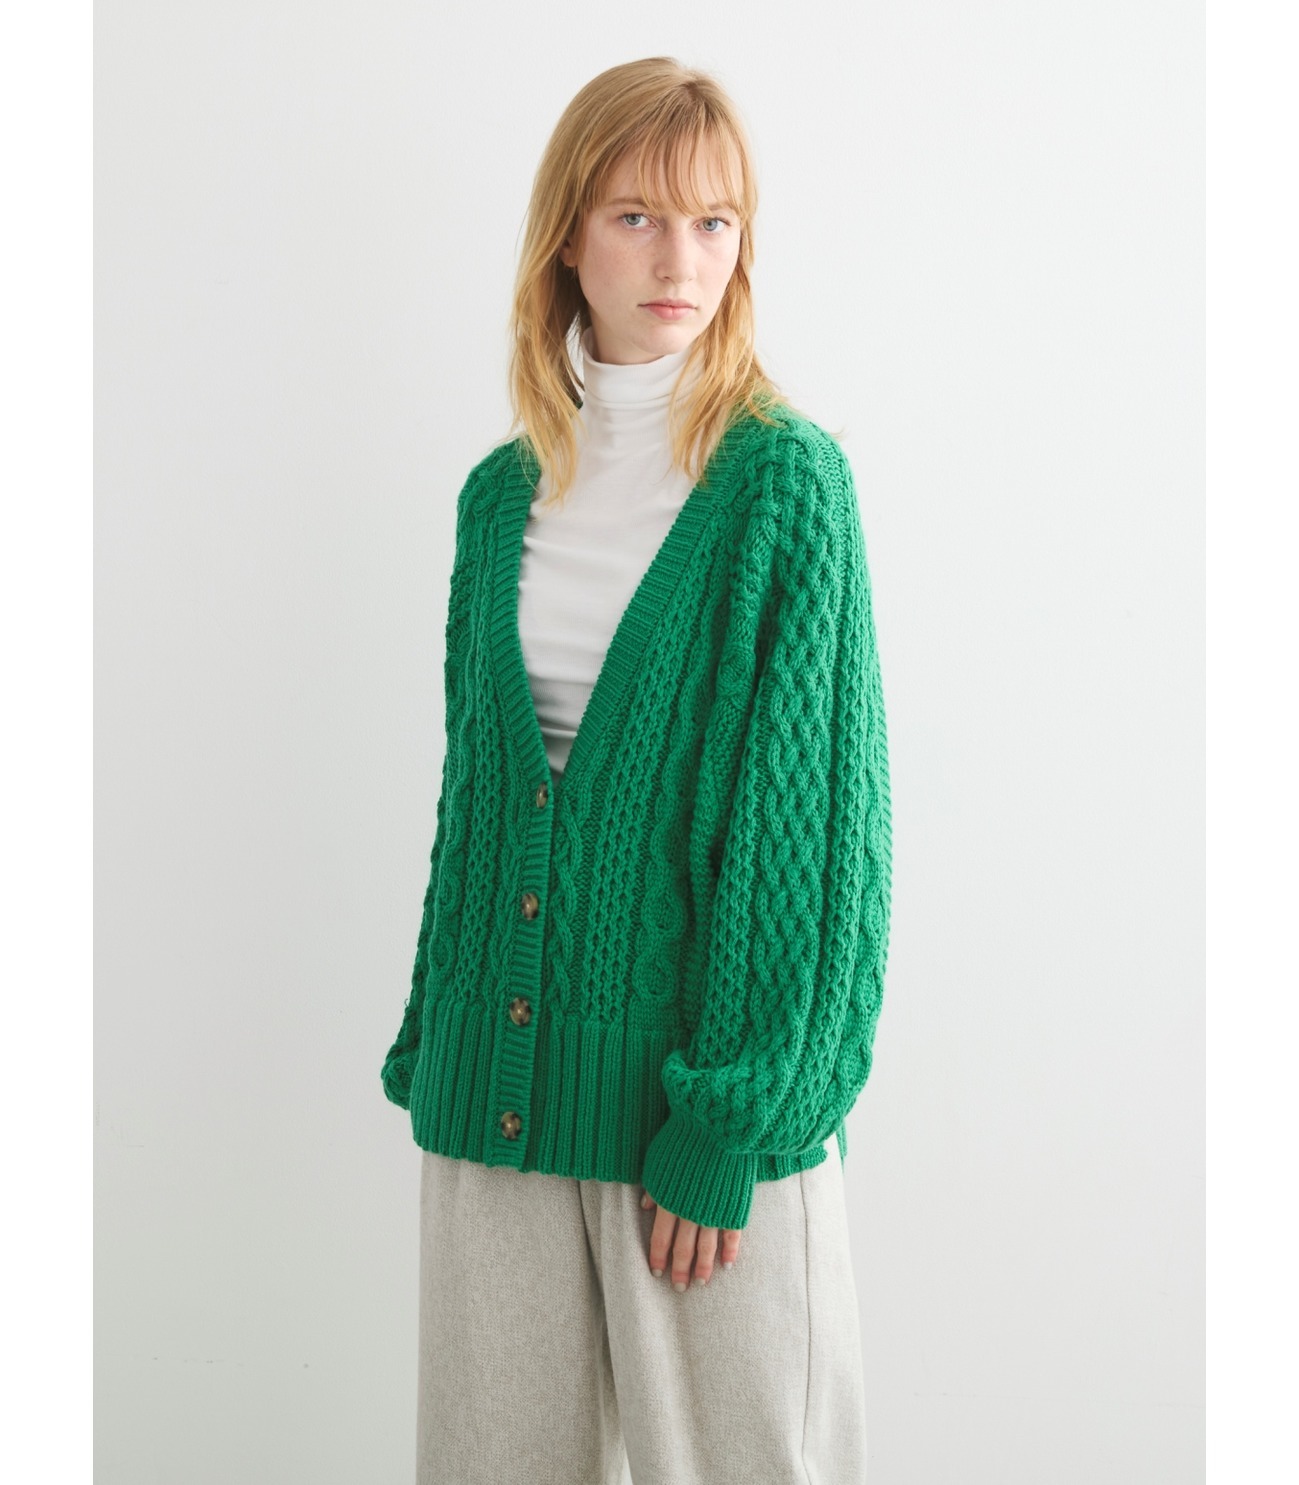 Bulky sweater l/s cable cardy 詳細画像 off white 7